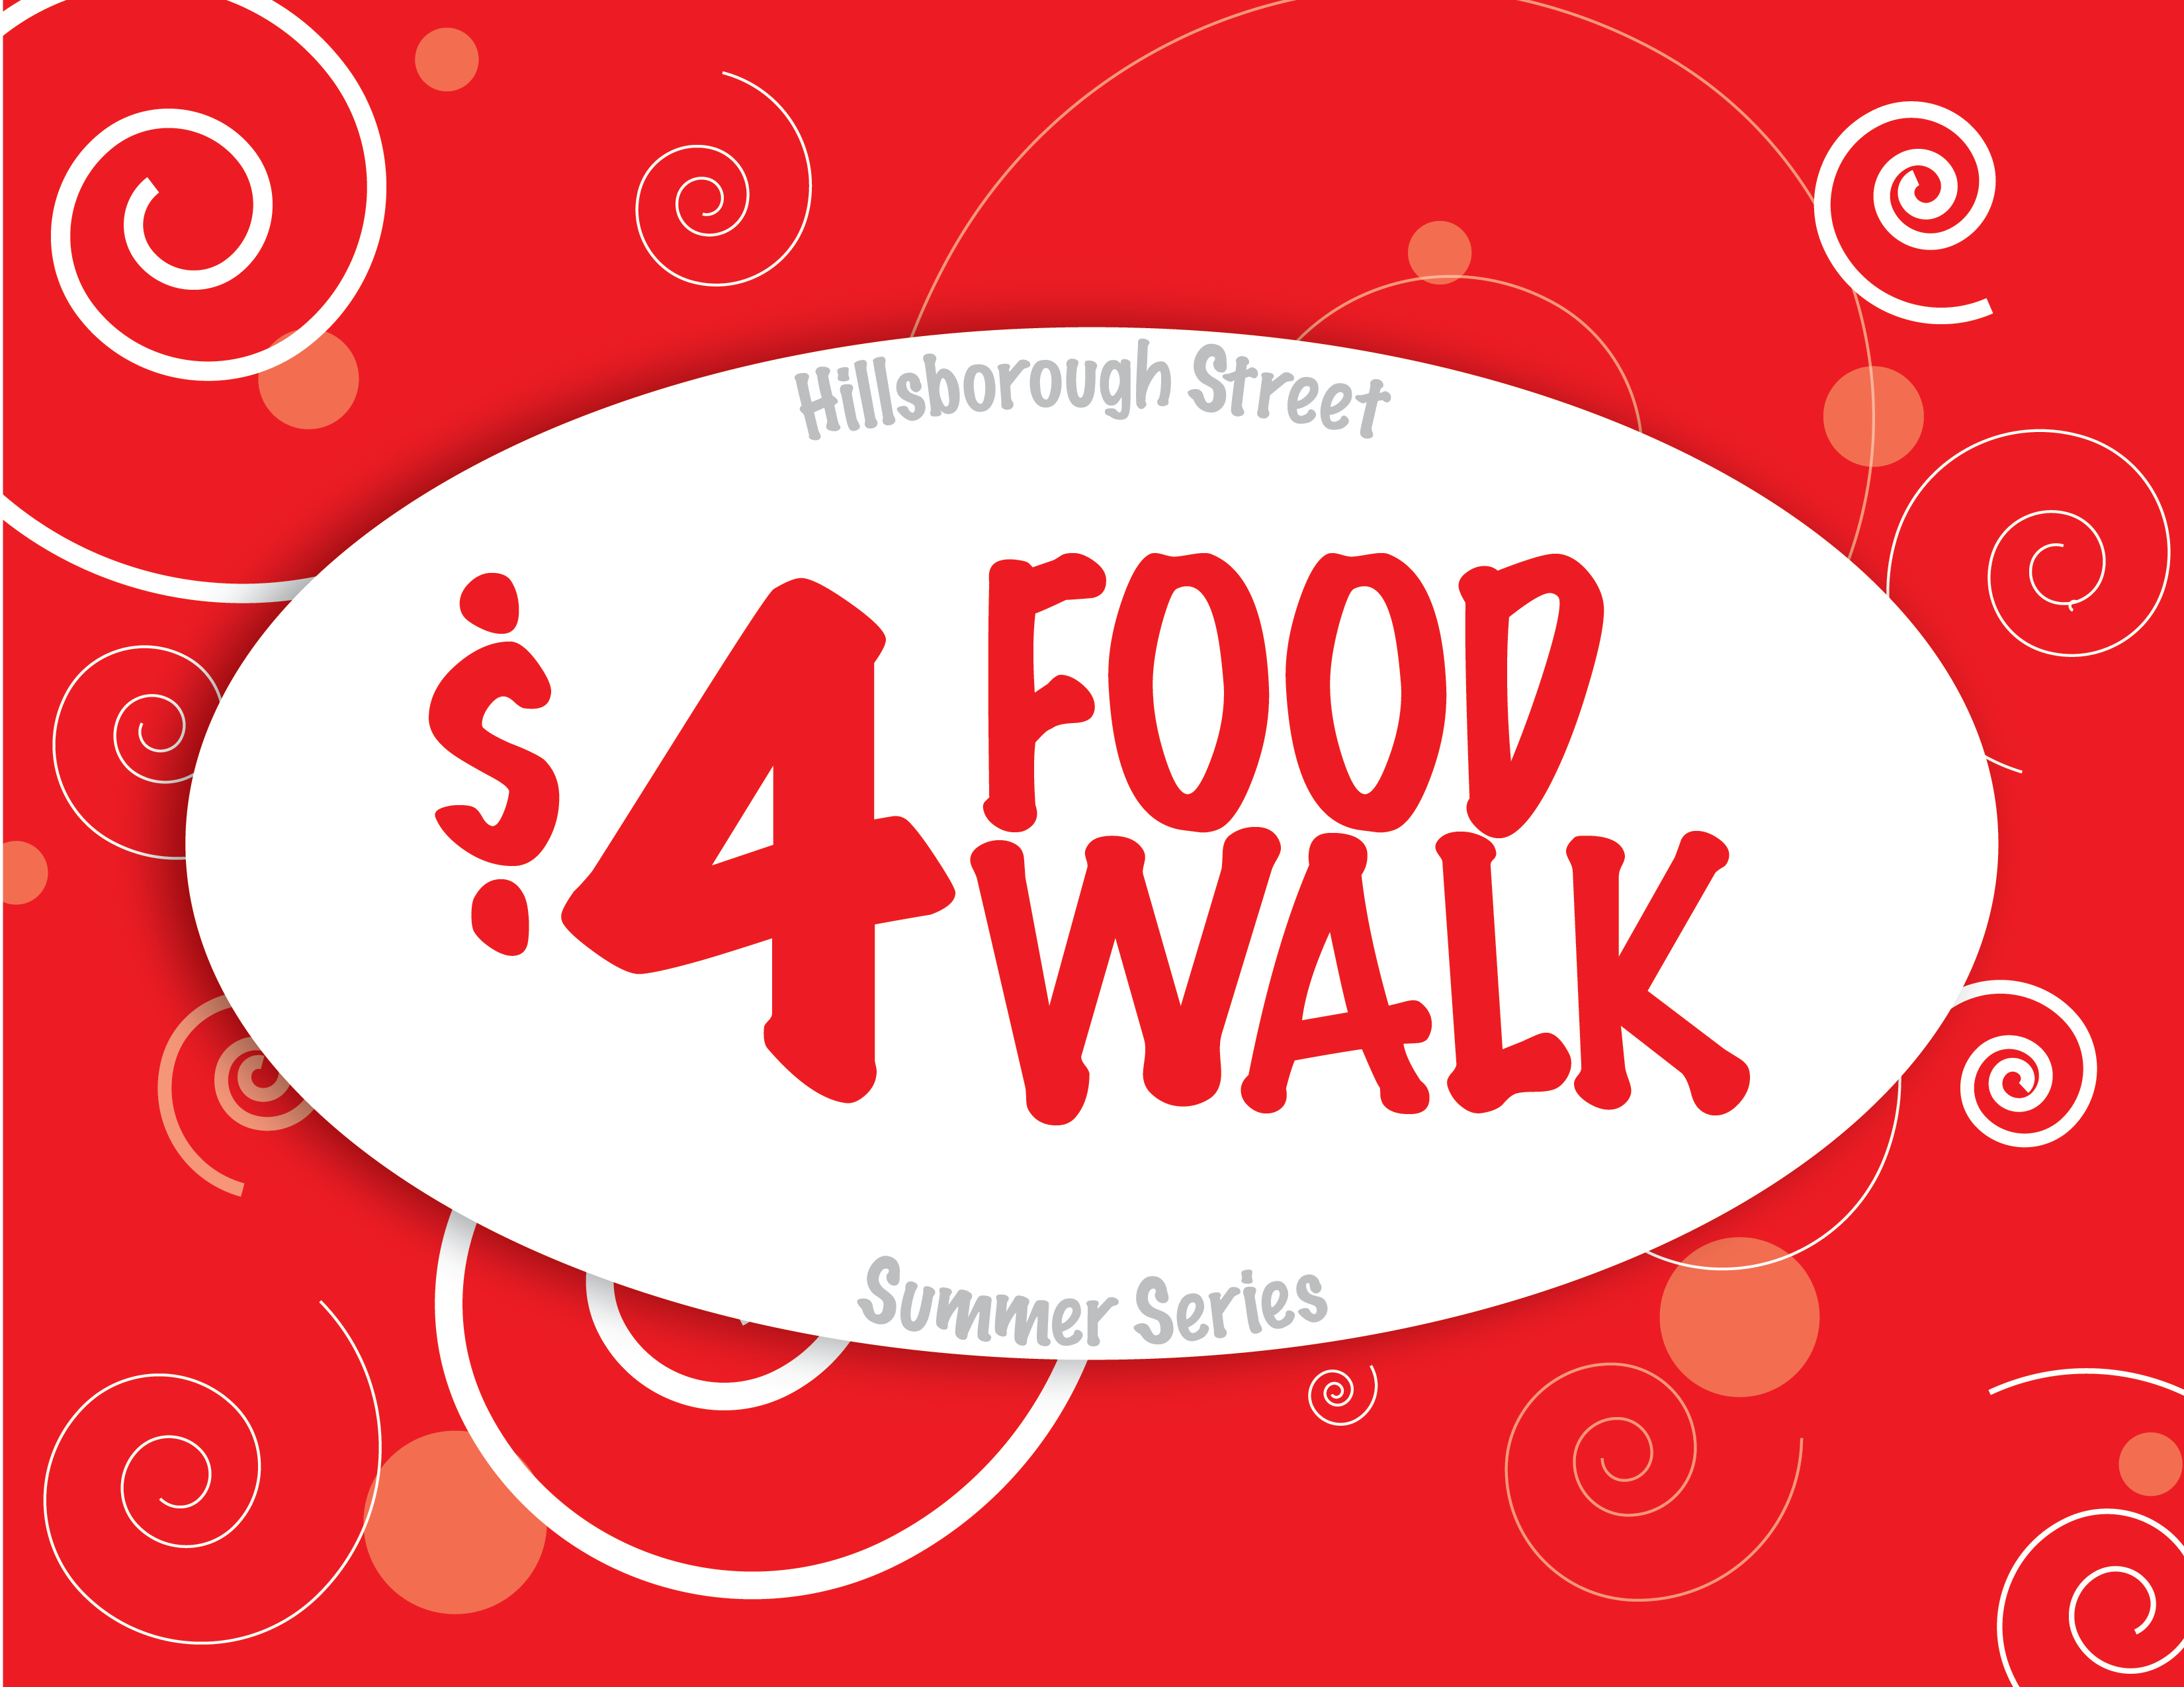 Live It Up! Hillsborough Street Brings $4 Food Walk to Life this Summer